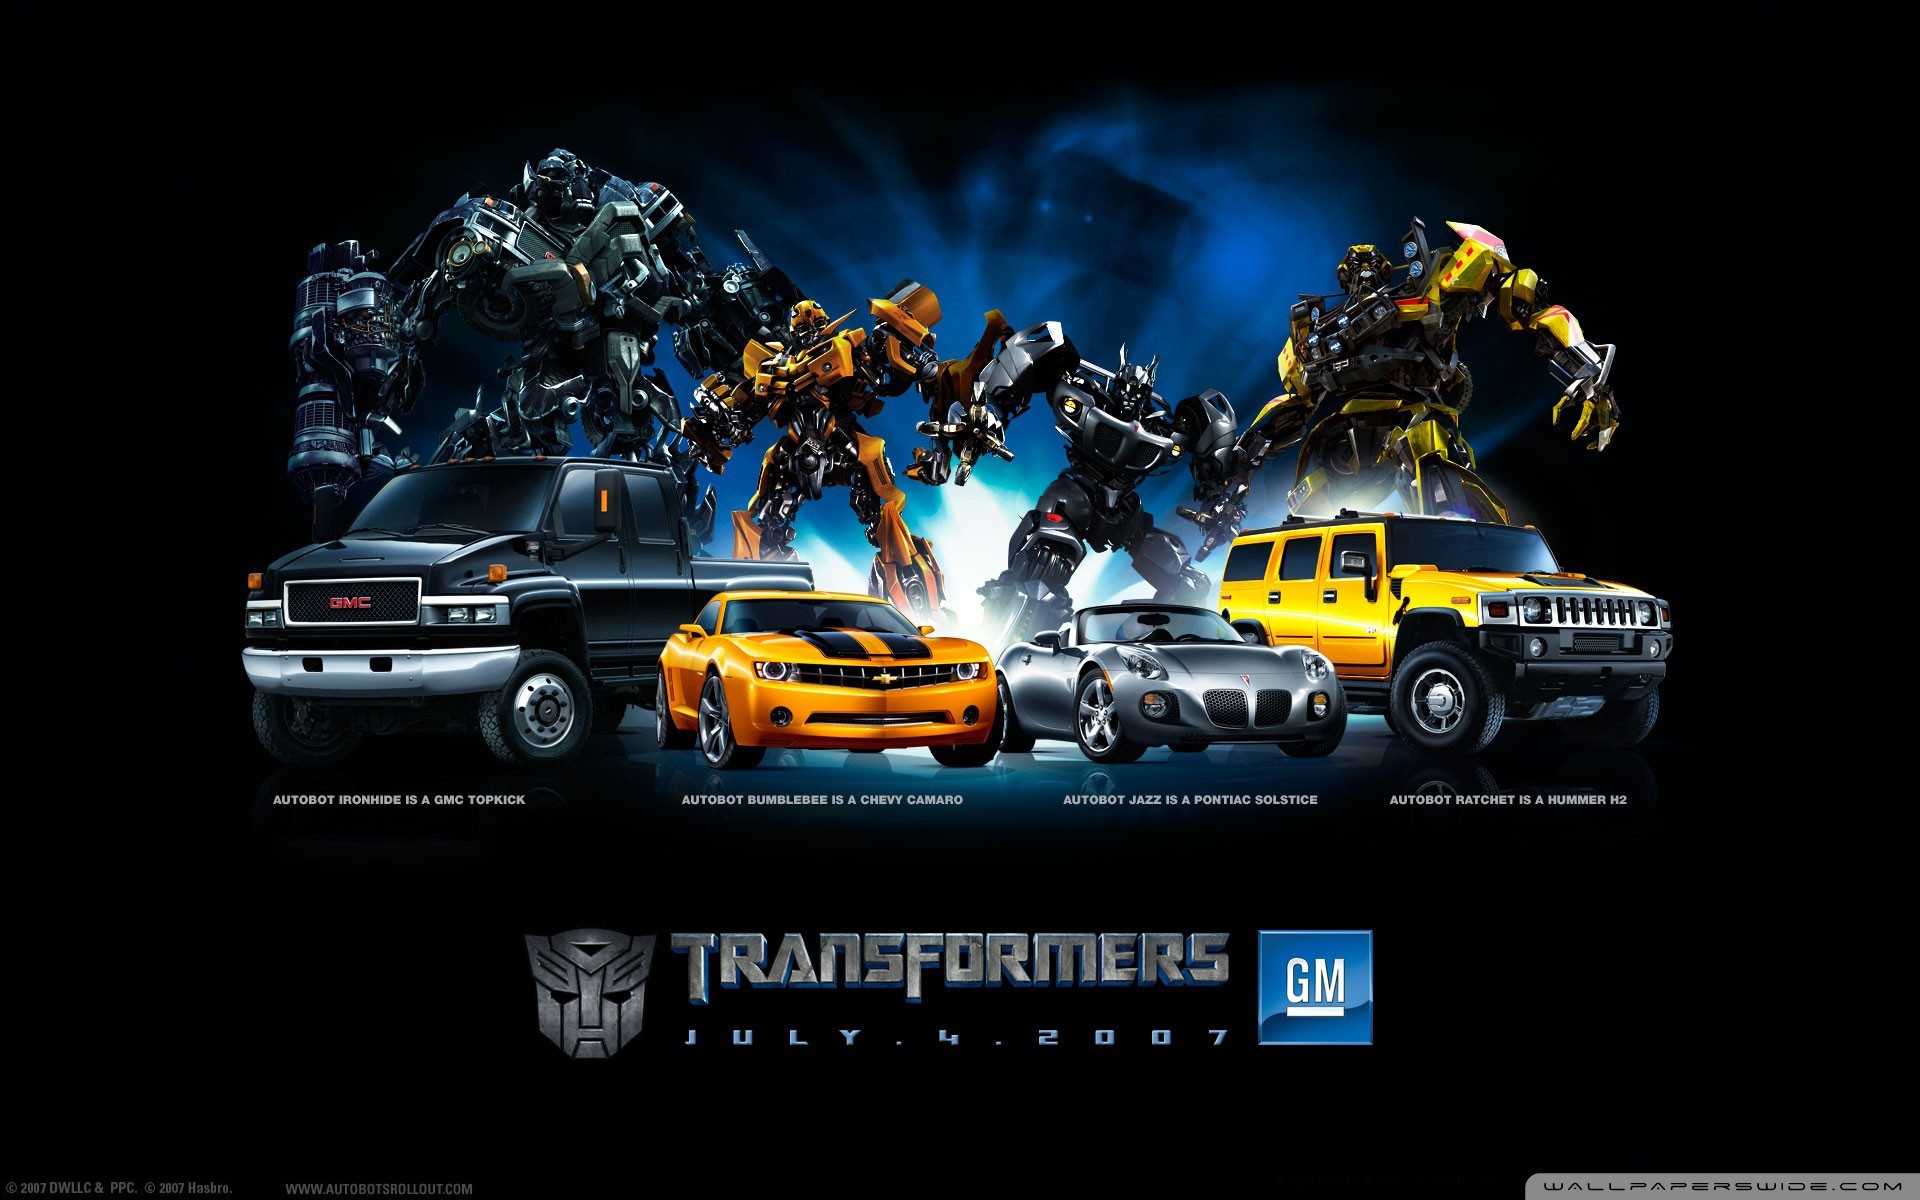 1920x1200 Transformers: Dark Of The Moon HD Wallpapers Backgrounds 1600Ã900  Transformers 3 HD Wallpapers (46 Wallpapers) | Adorable Wallpapers | Desktop  | Pinterest ...